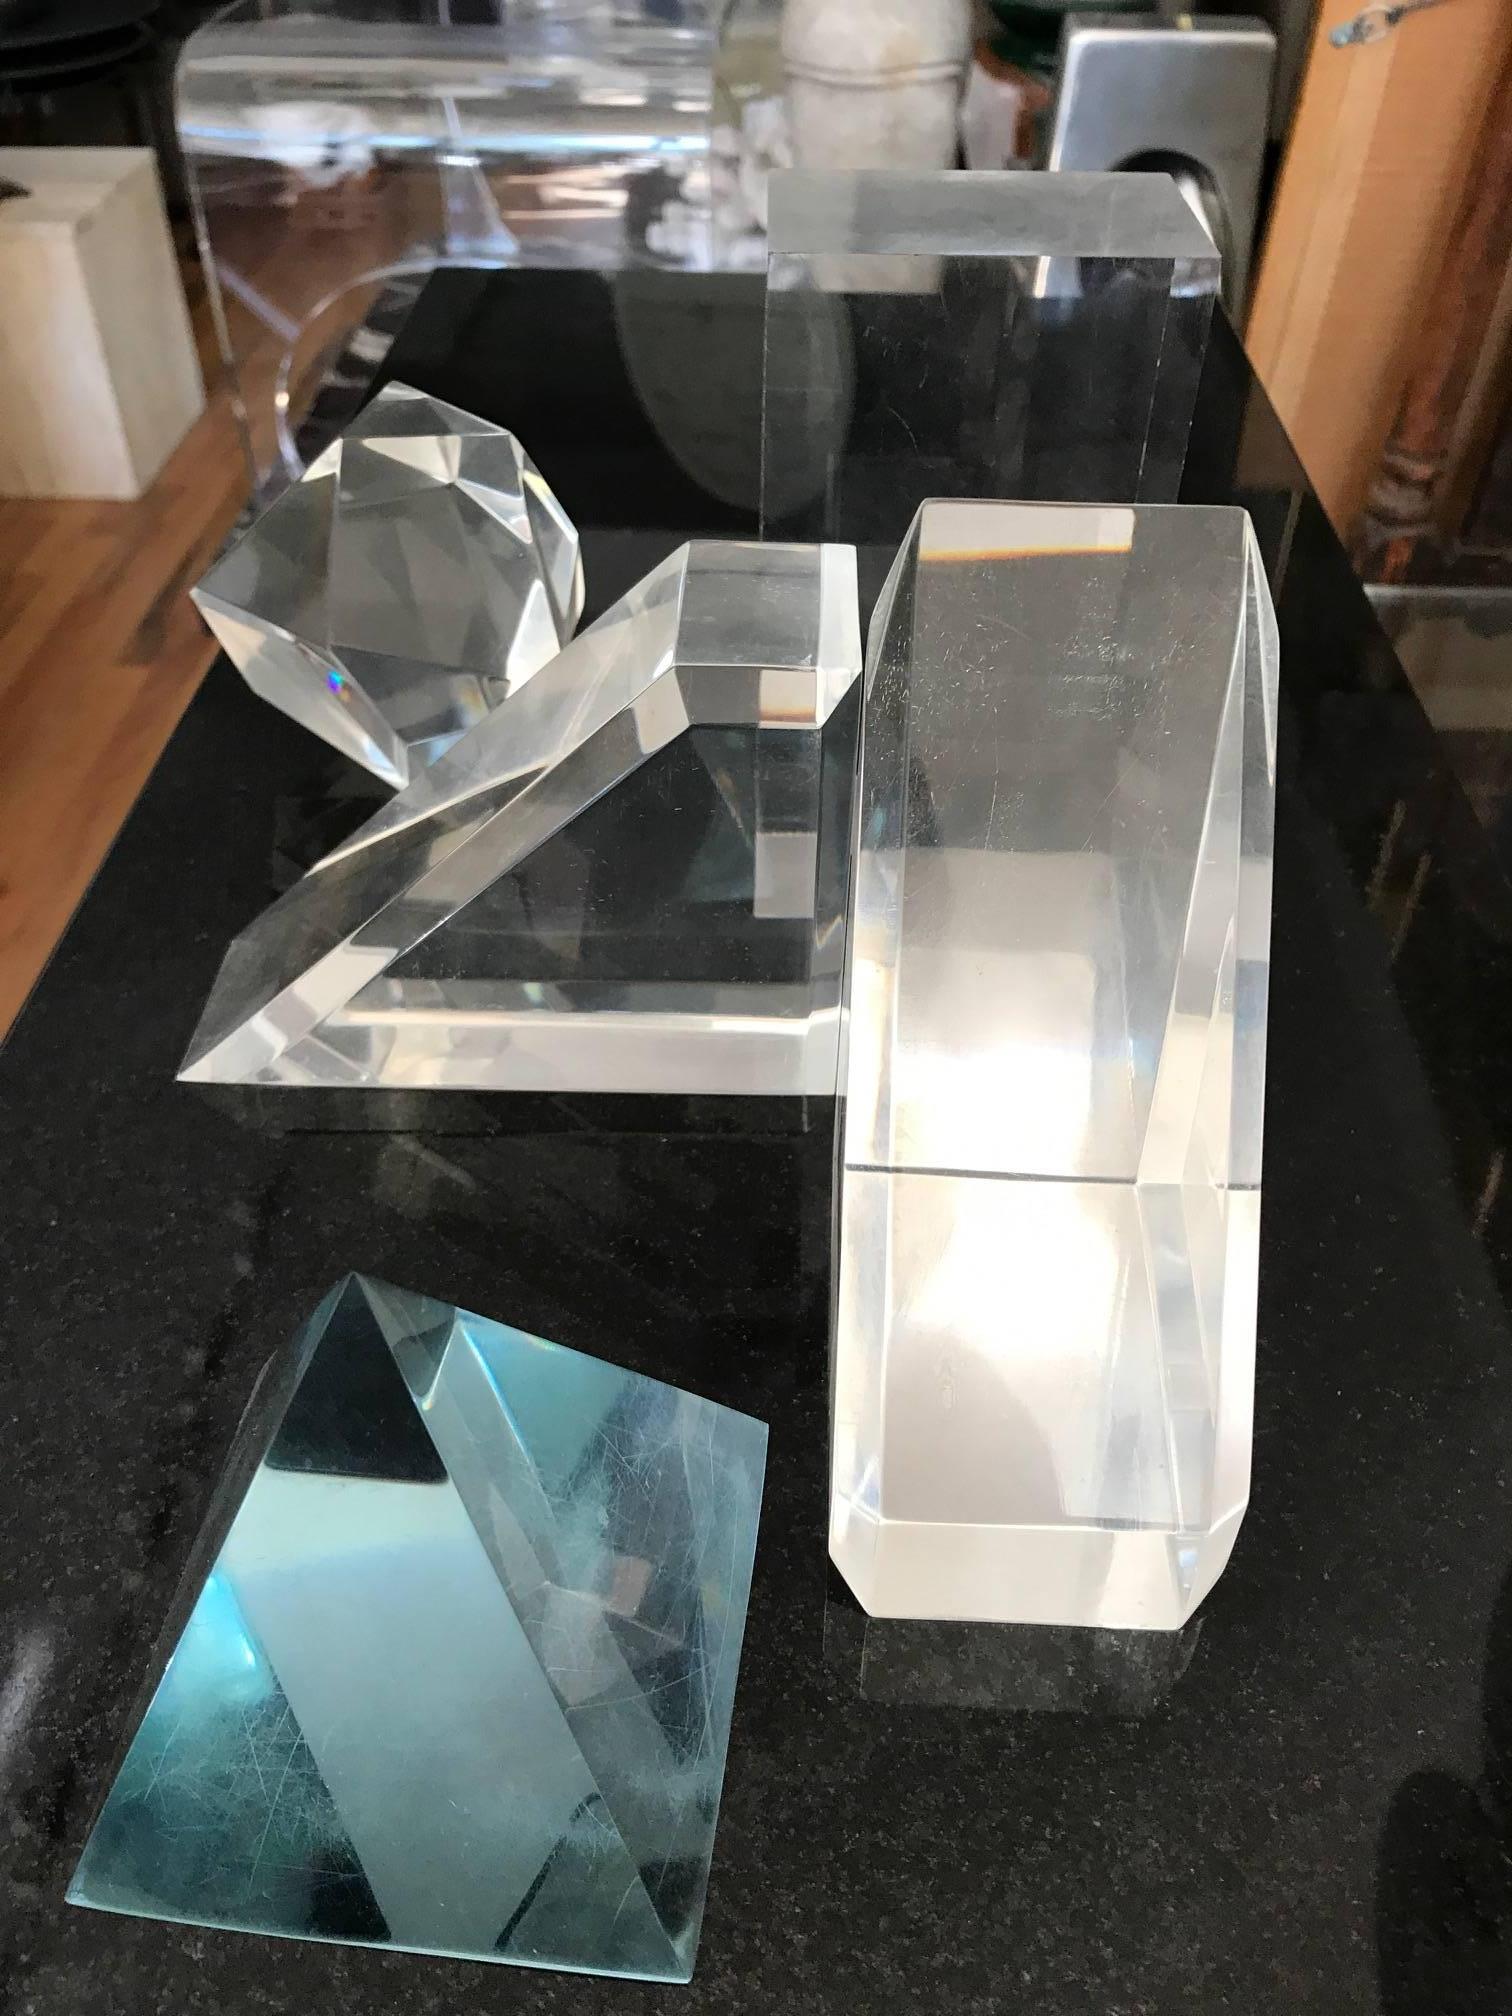 Highly sculptural collection of five Lucite geometric tabletop decorative objects.
The collection consists of rectangle cube, pyramid, two triangles and a 12 sided polygon.
The items measurements are:
Rectangle cube H 5 x L 3 x D 2
Pyramid H 3 x